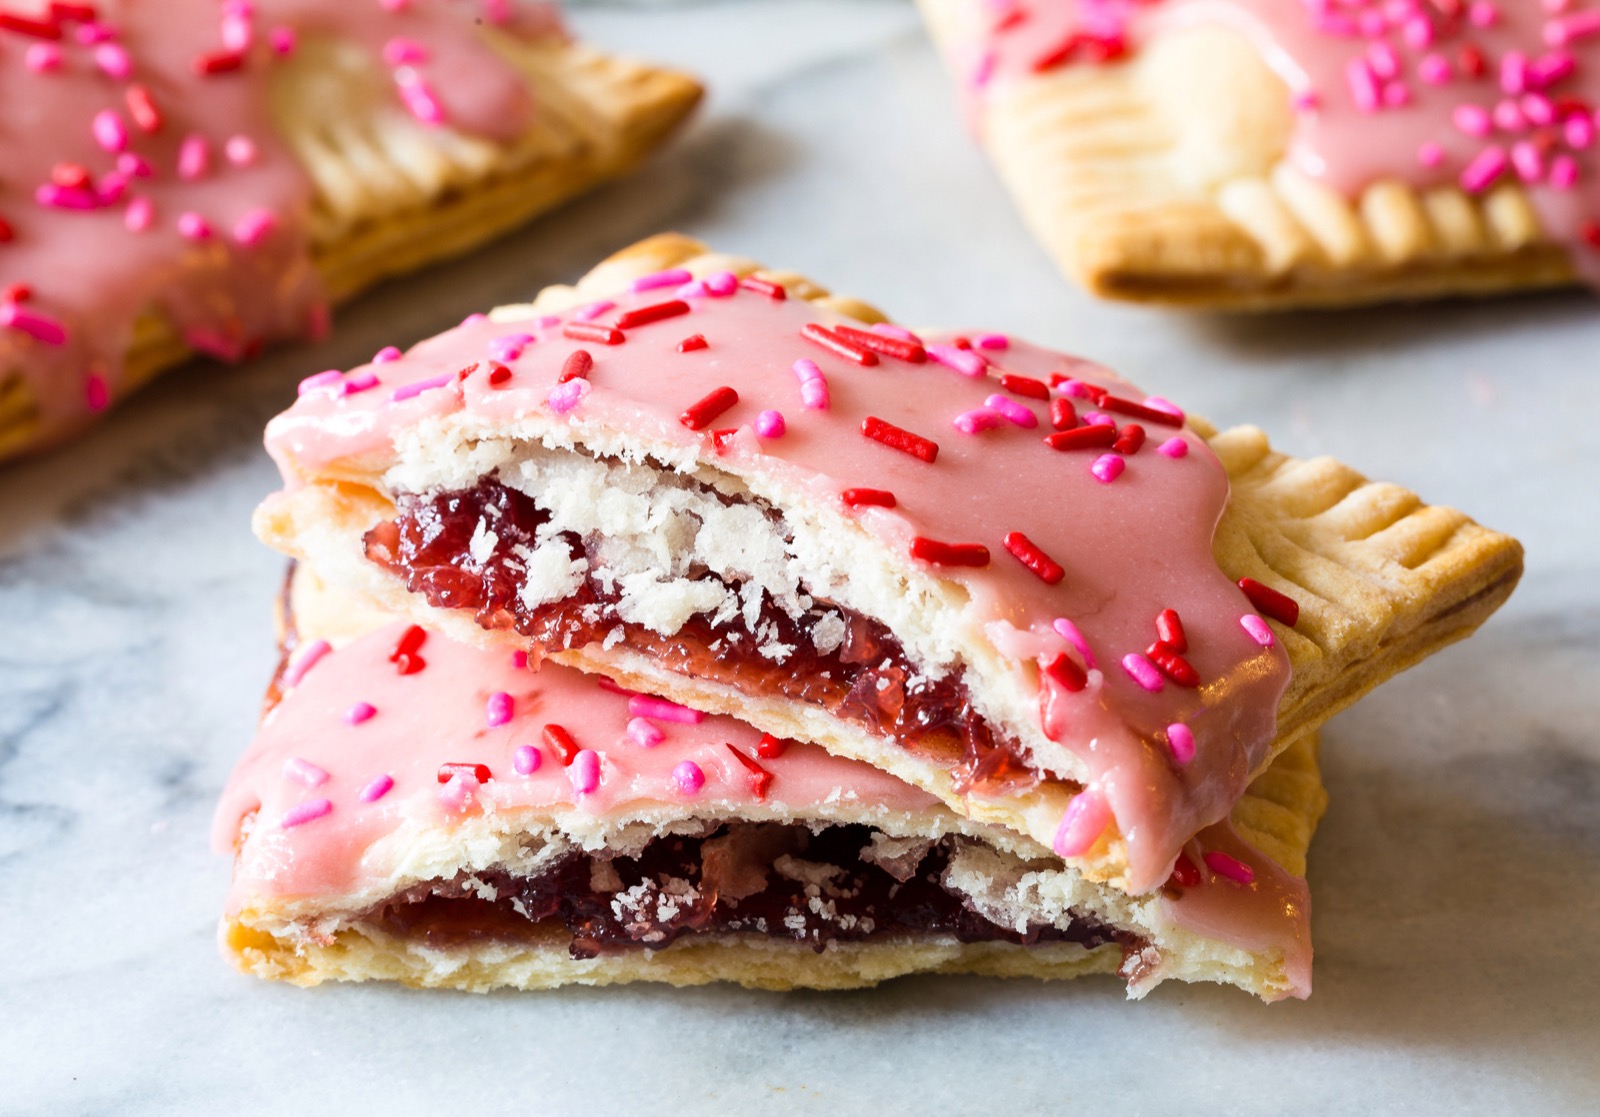 Are You an Older or Younger Person? 🥨 Choose Some Typical Snacks and We’ll Guess Toaster Pastry Pop-Tarts